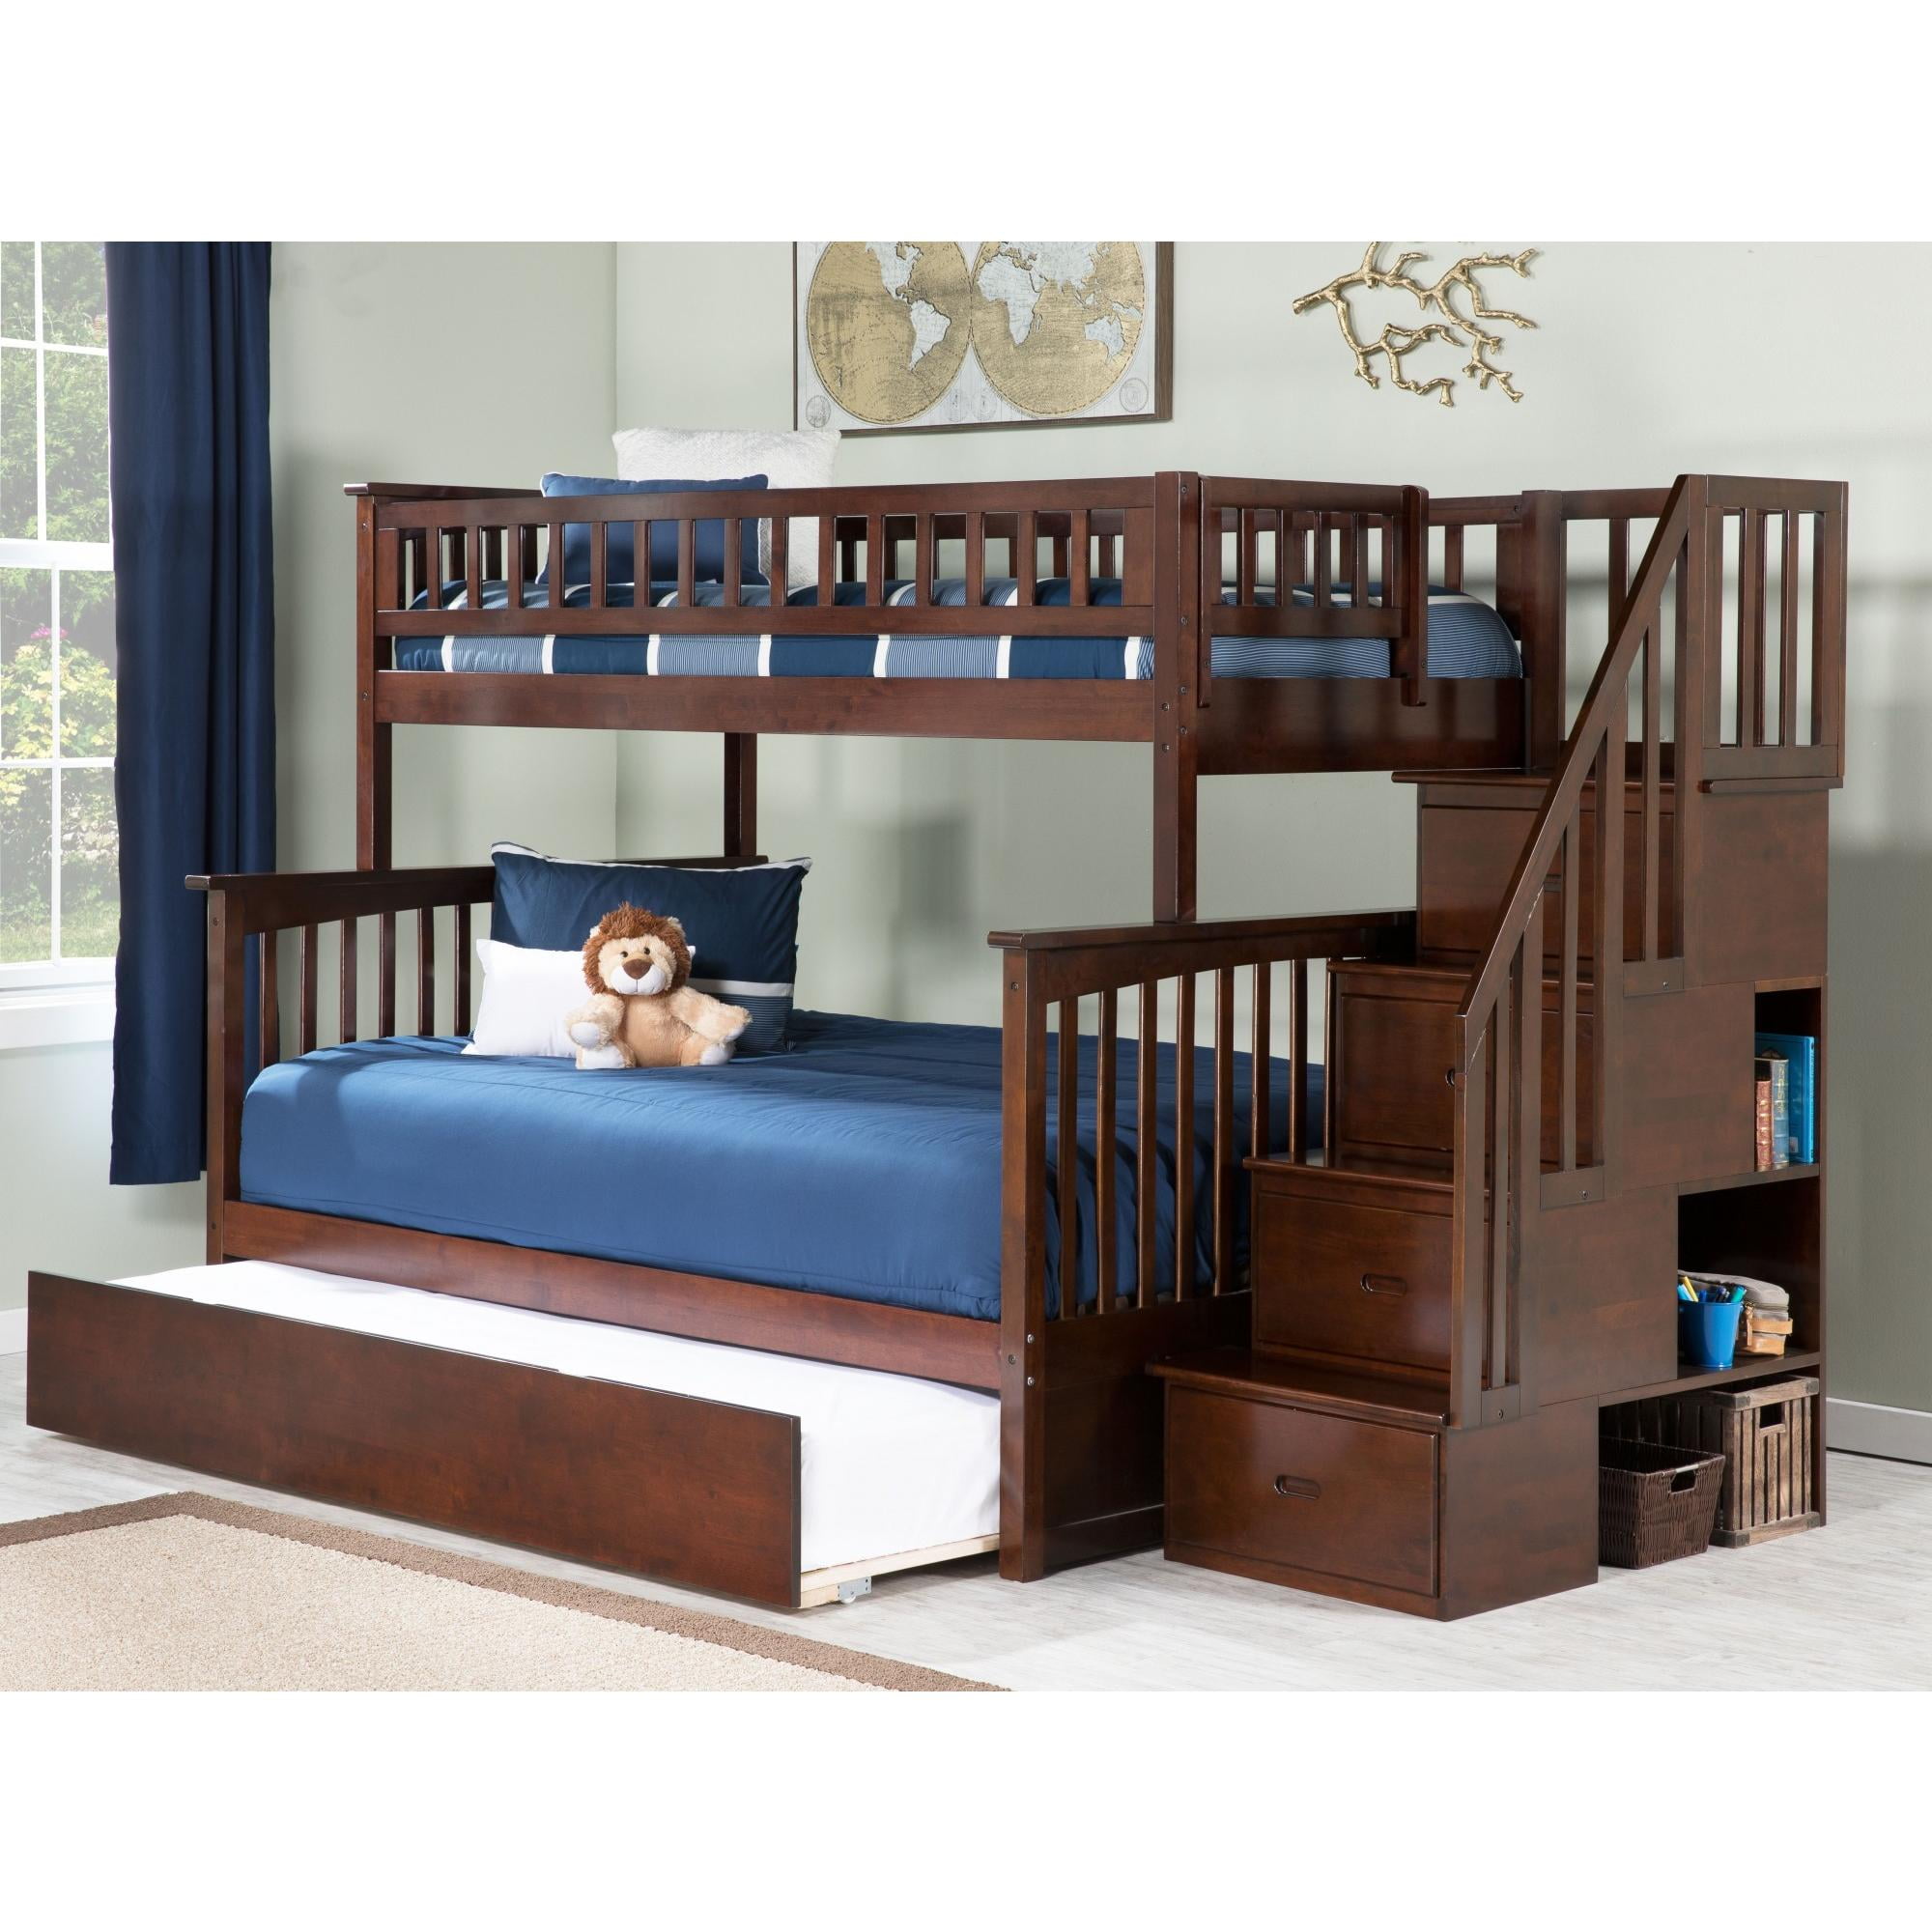 Columbia Staircase Bunk Bed Twin Over, Diy Twin Over Full Bunk Bed With Stairs